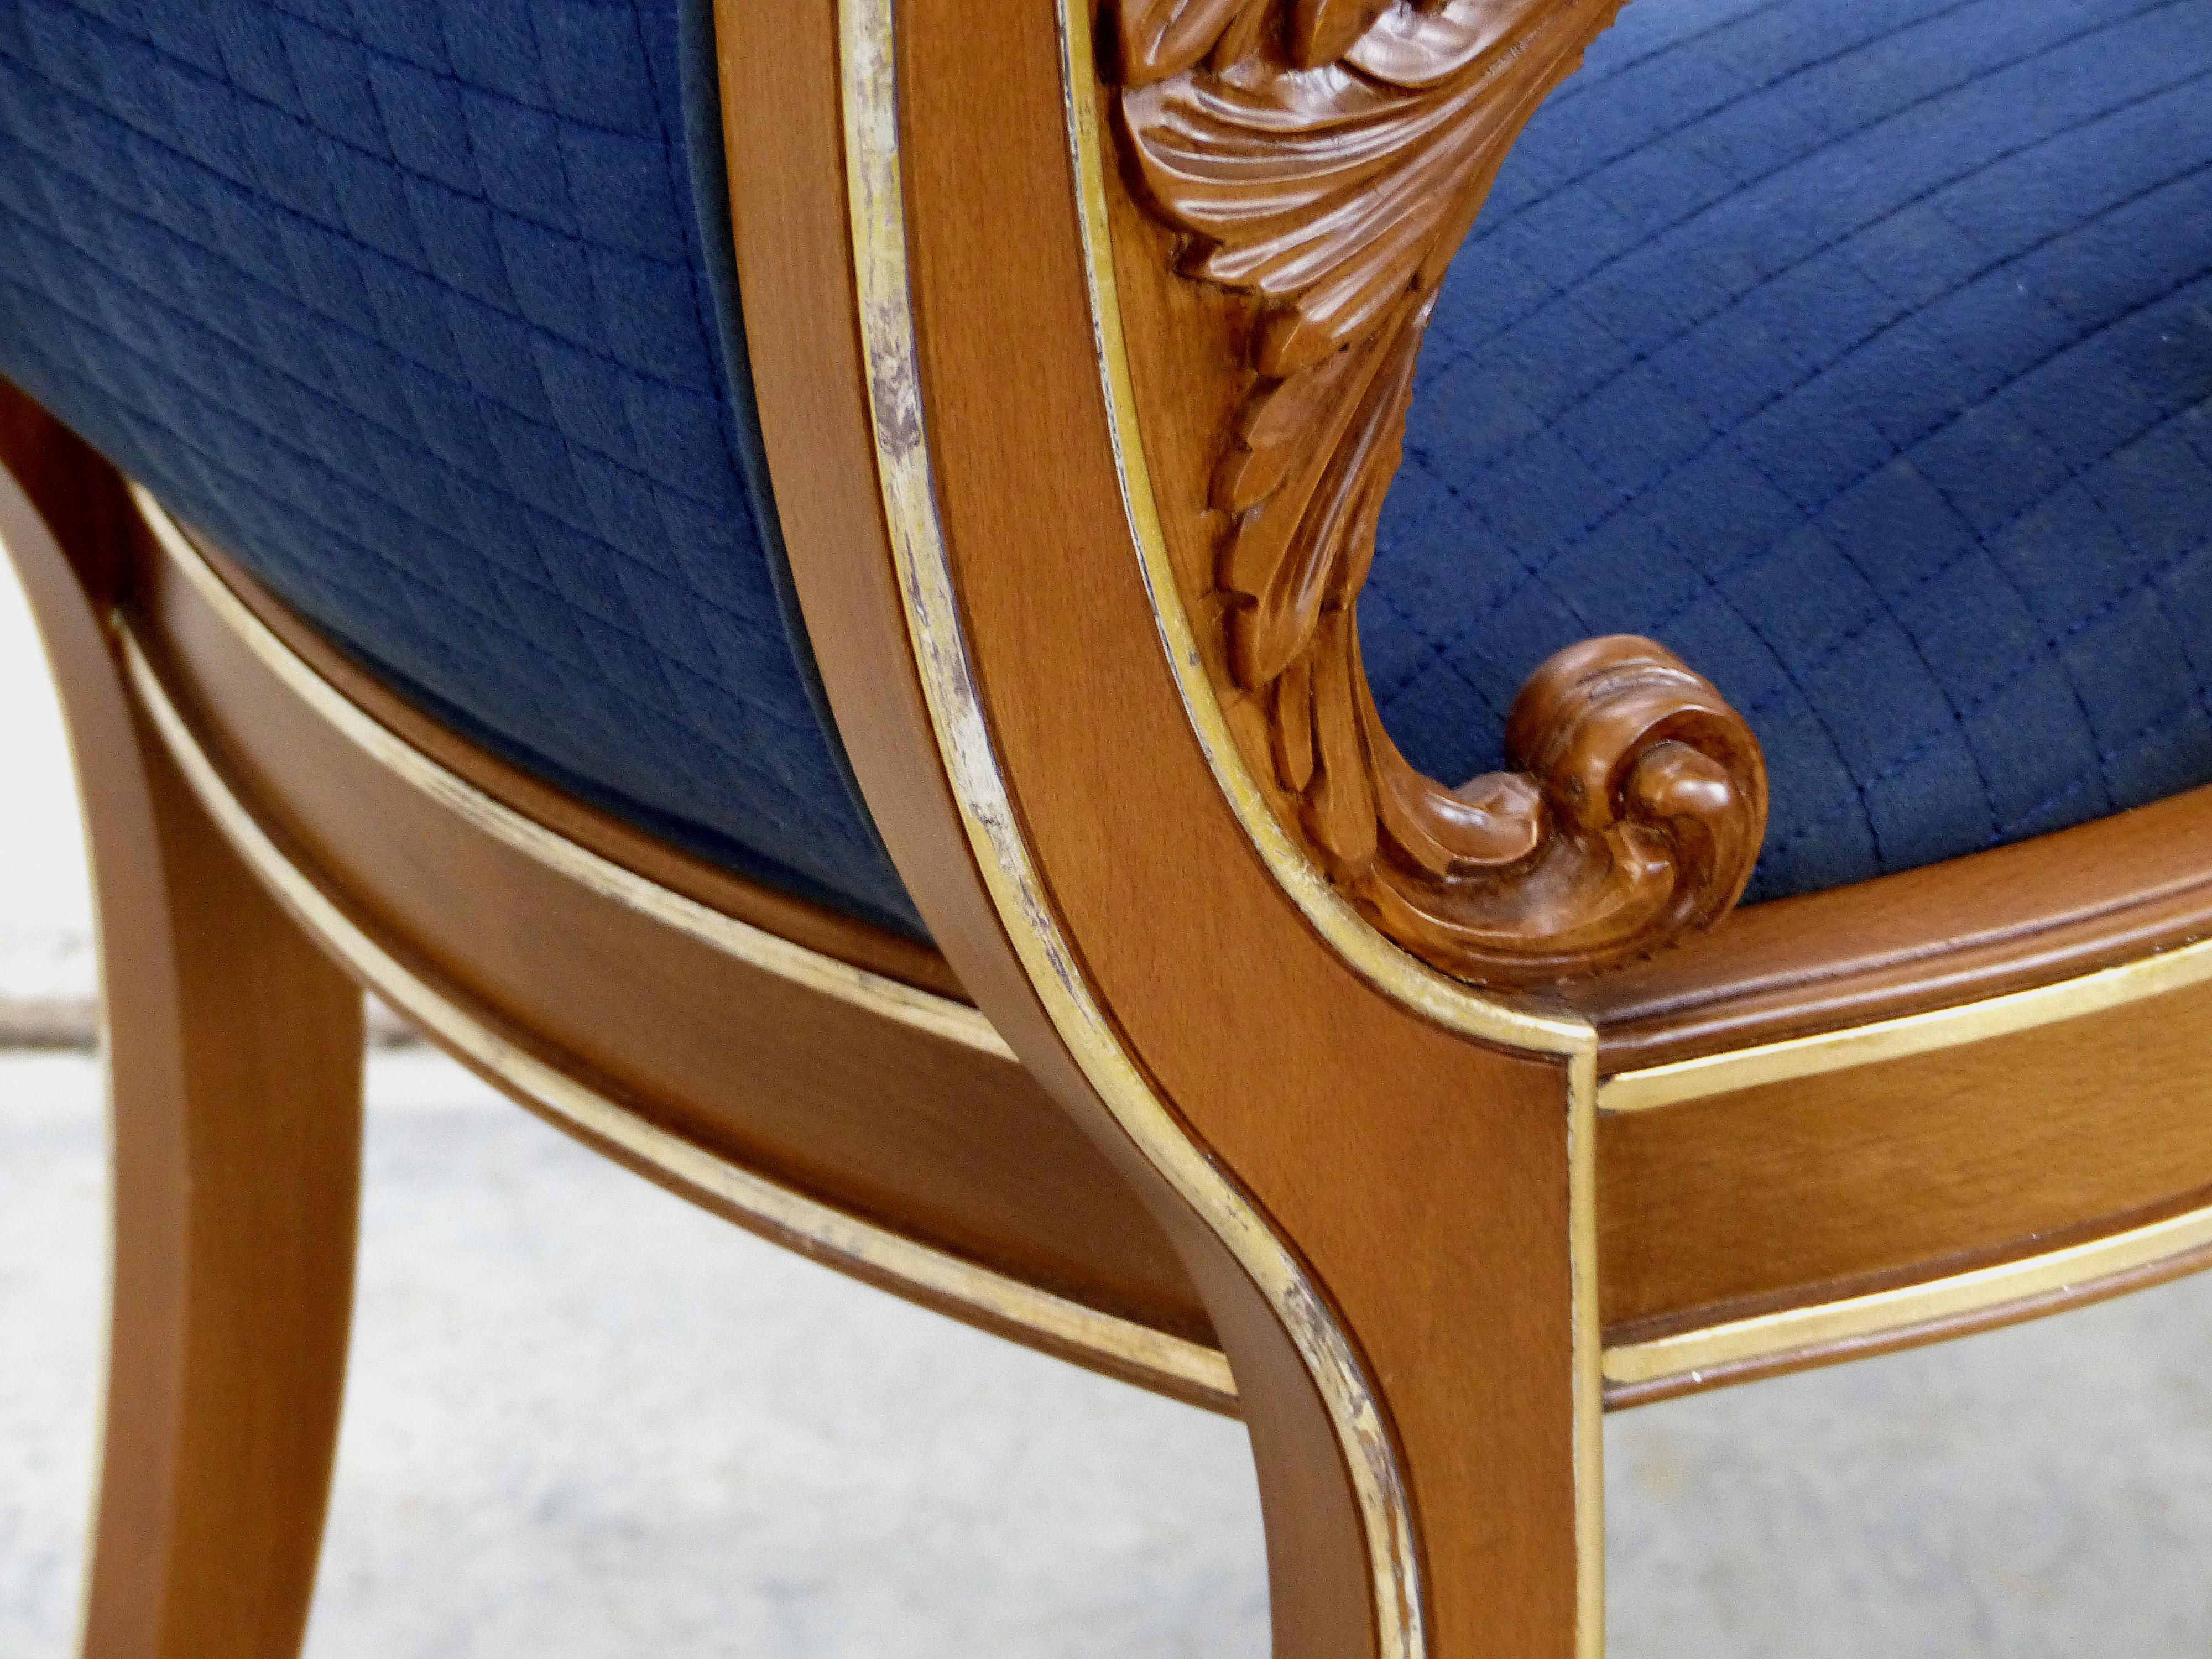 Contemporary Gianni Versace Vanitas Carved Armchair with a Scrolling Arm and Gilt Details